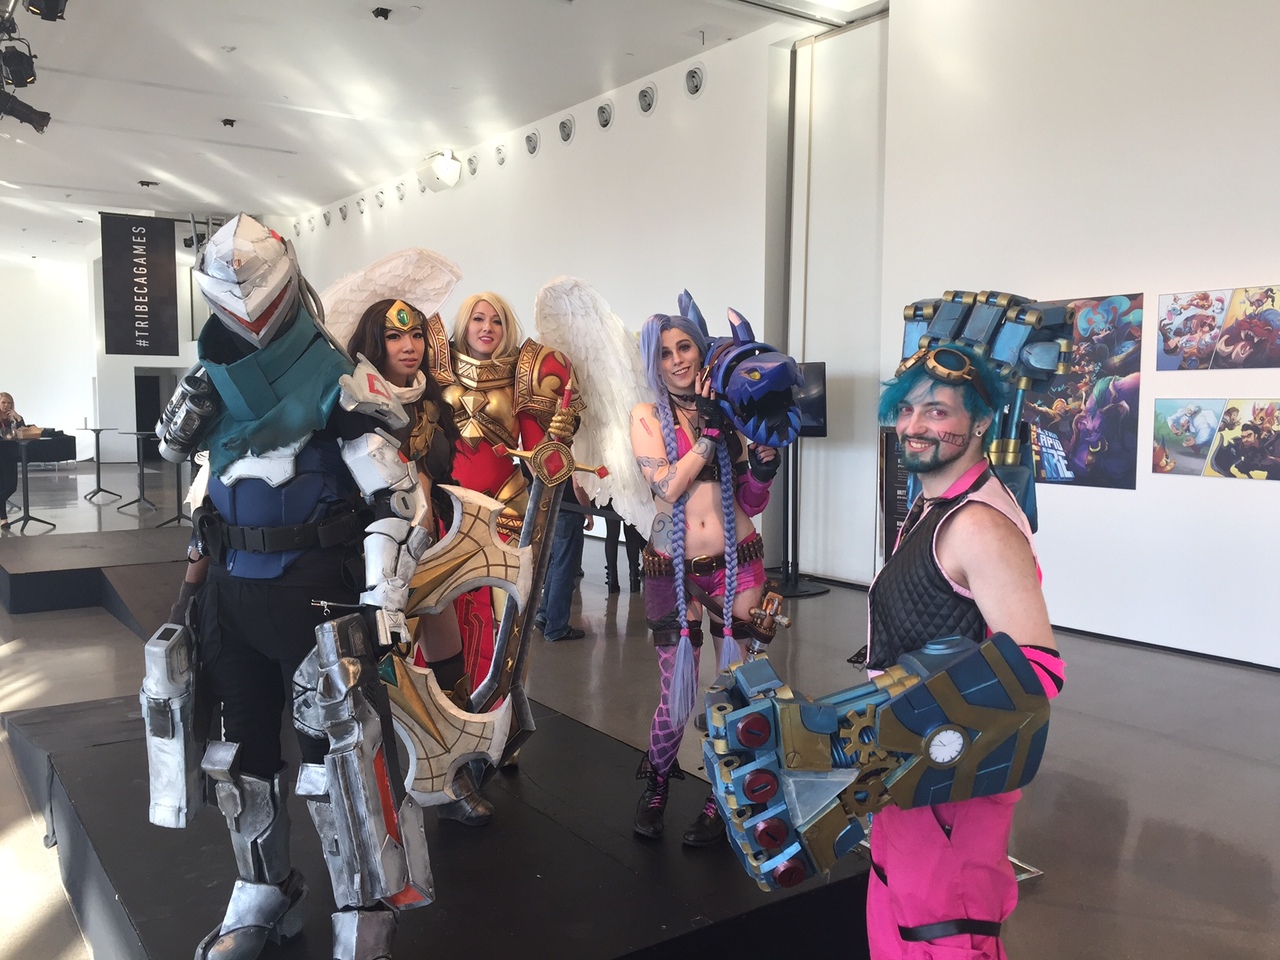 LEAGUE OF LEGENDS Cosplayers